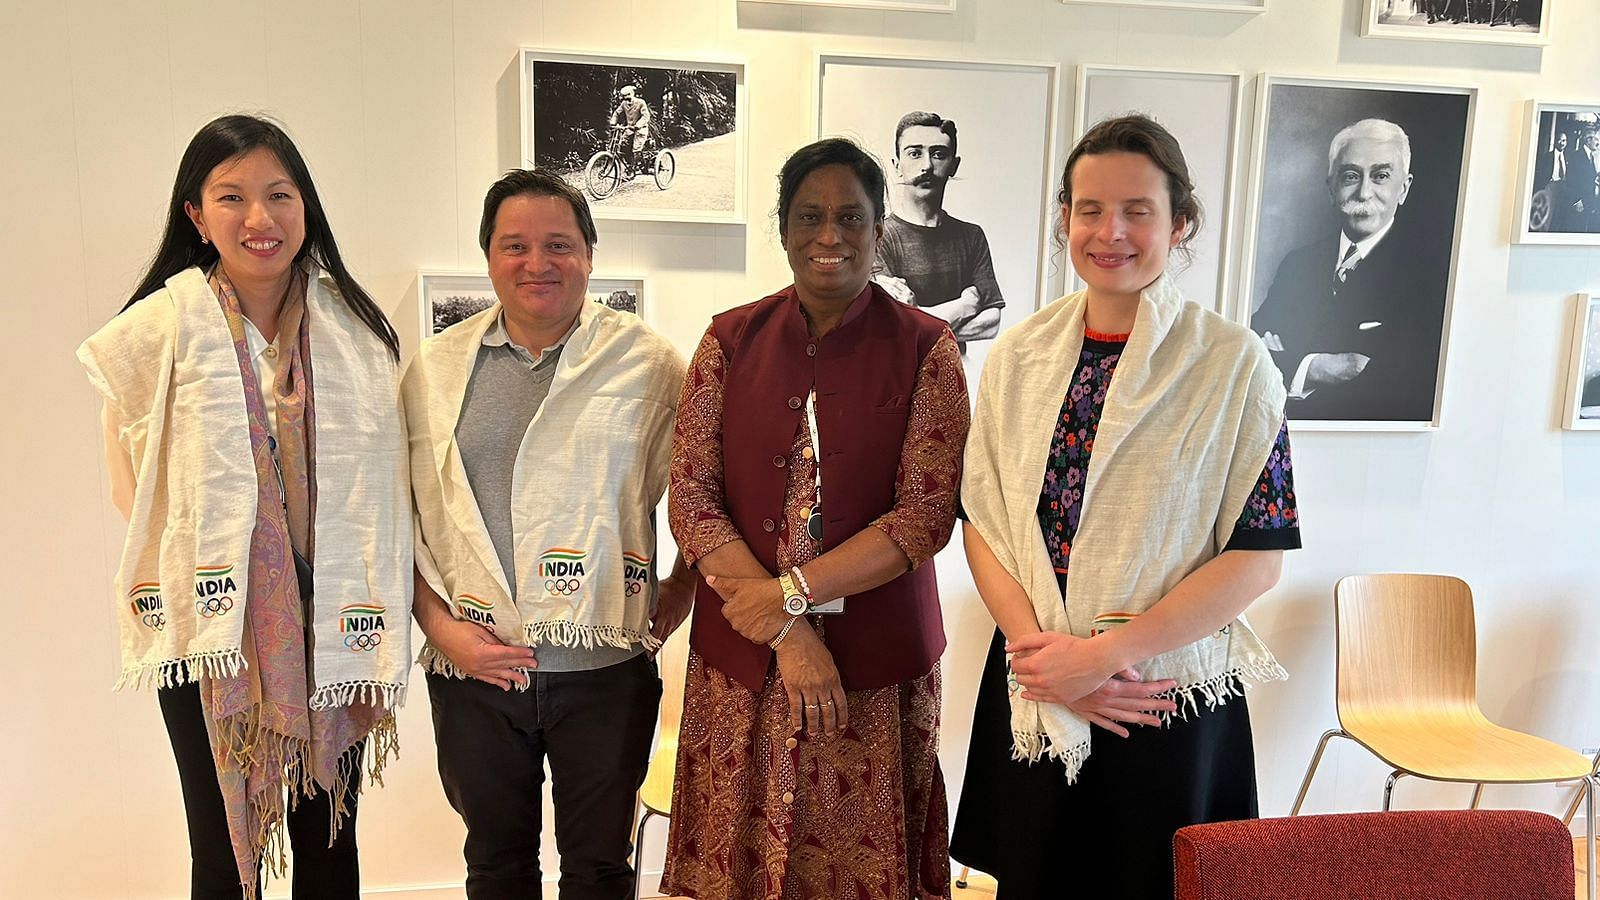 IOA president PT Usha was in Lausanne for meetings with IOC officials